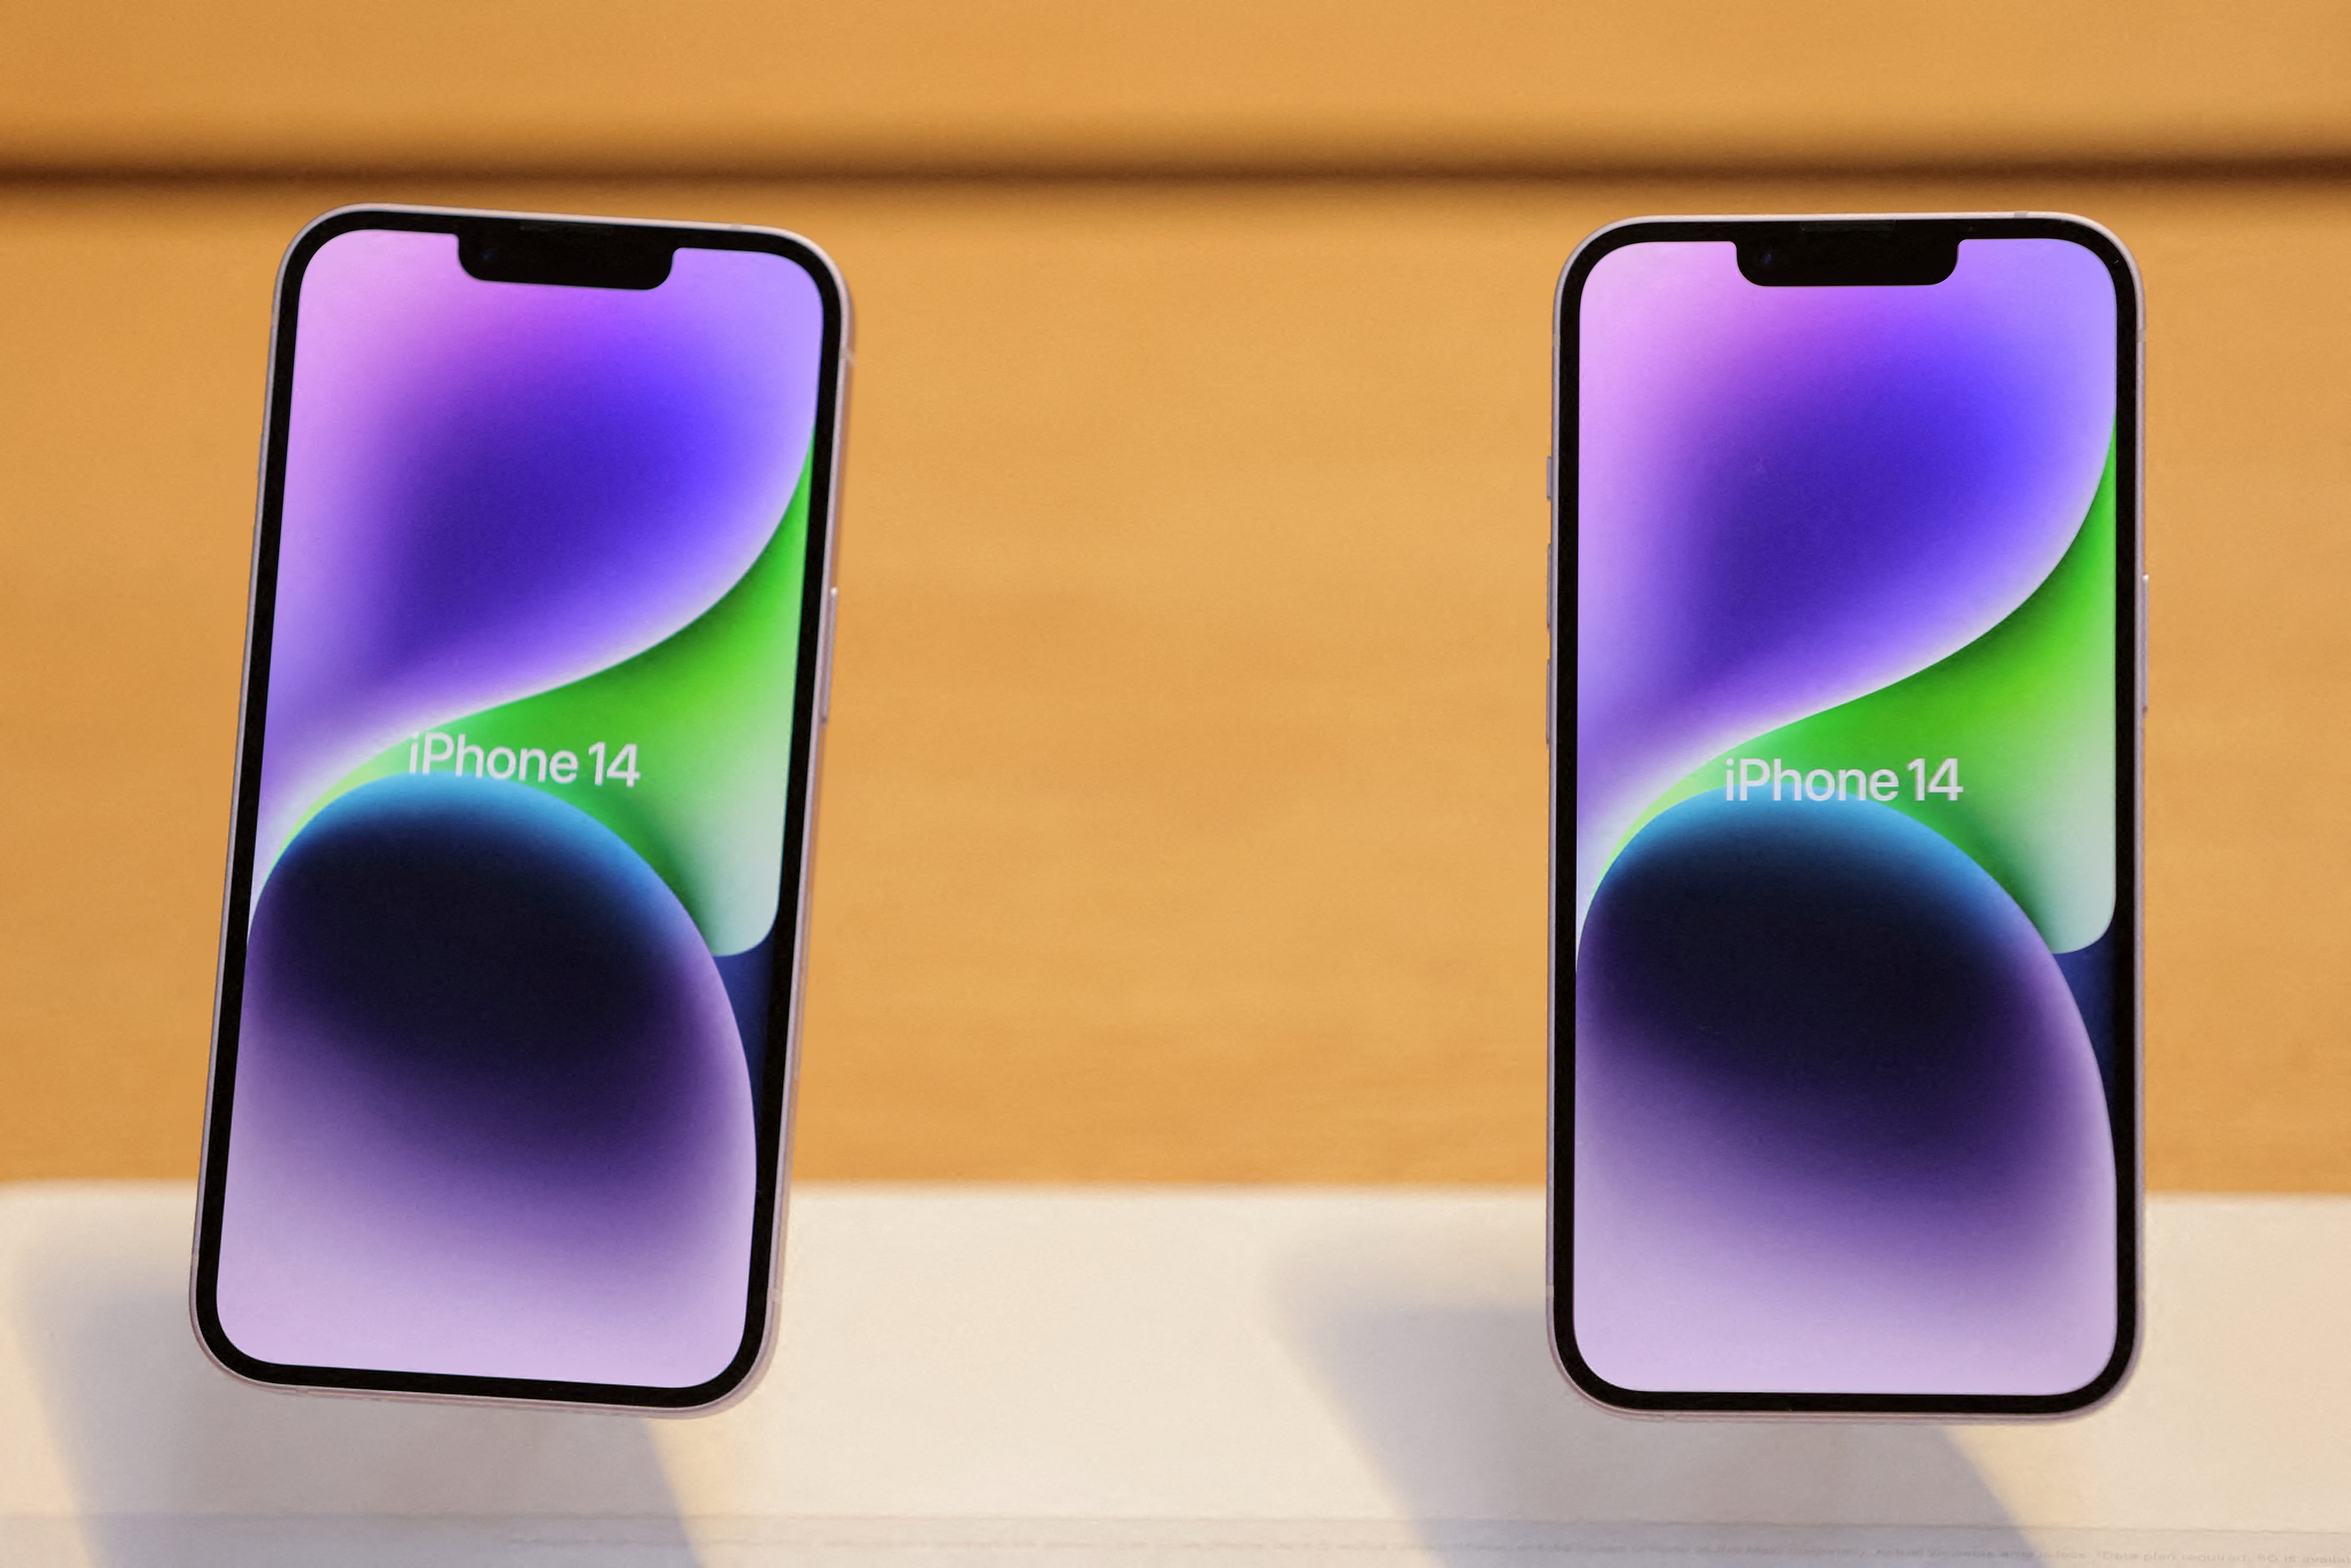 Apple's iPhone Pro shipments may fall 20 mln units short of estimates -  analyst